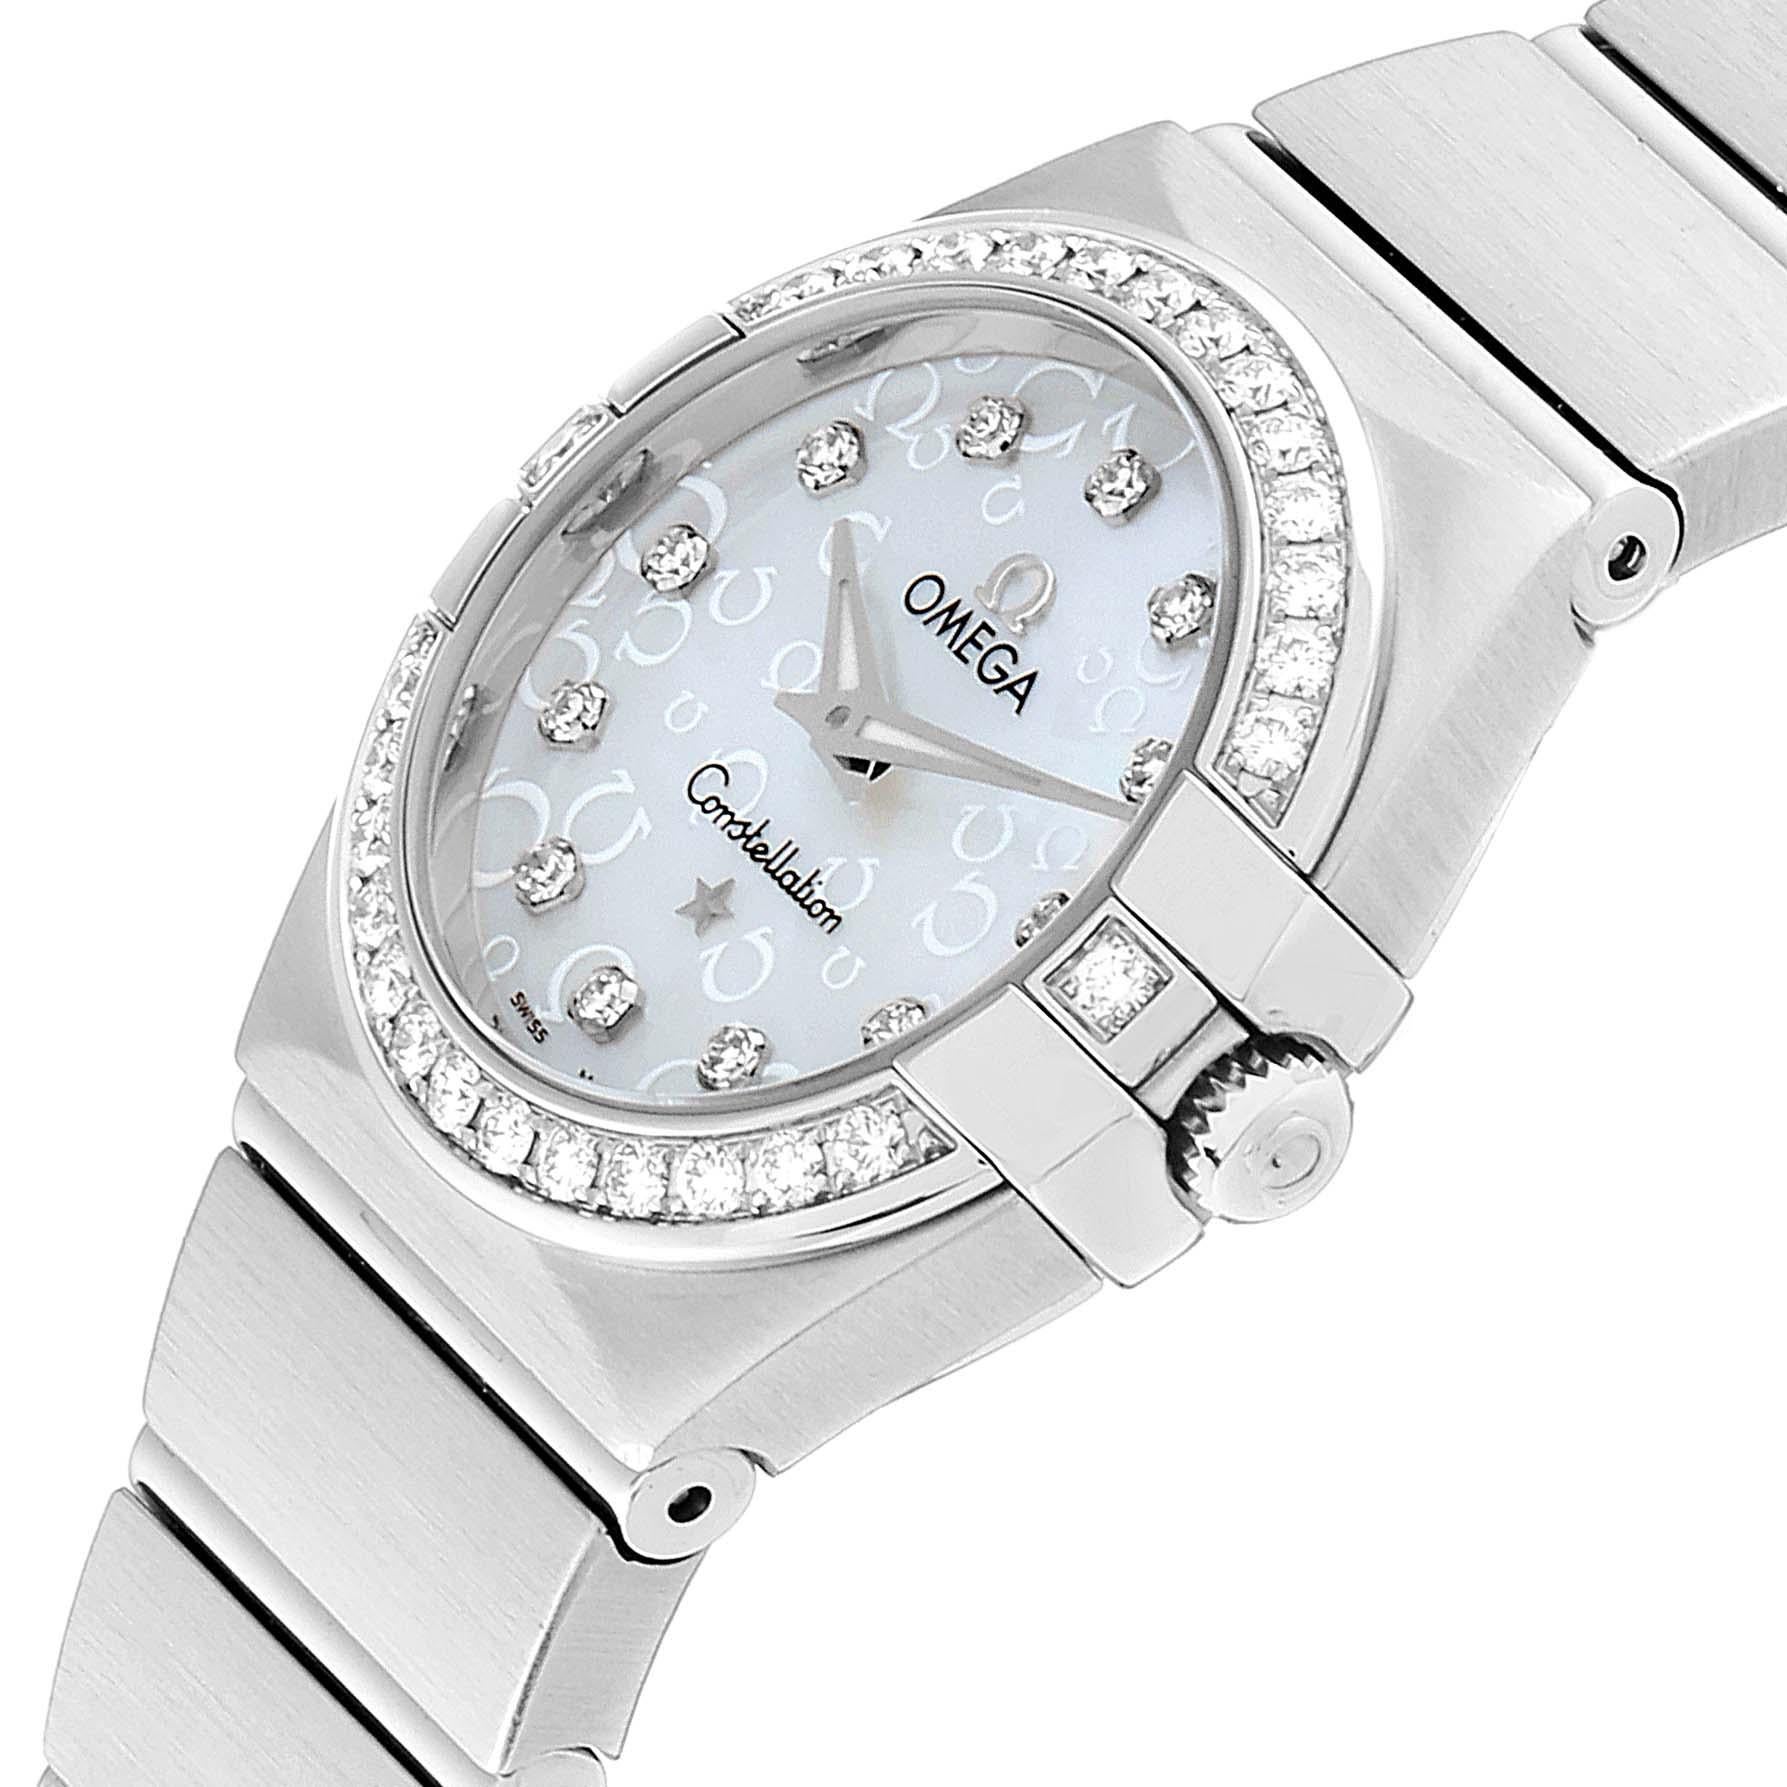 Omega Constellation Diamond Ladies Watch 123.15.24.60.52.001 In Excellent Condition For Sale In Atlanta, GA